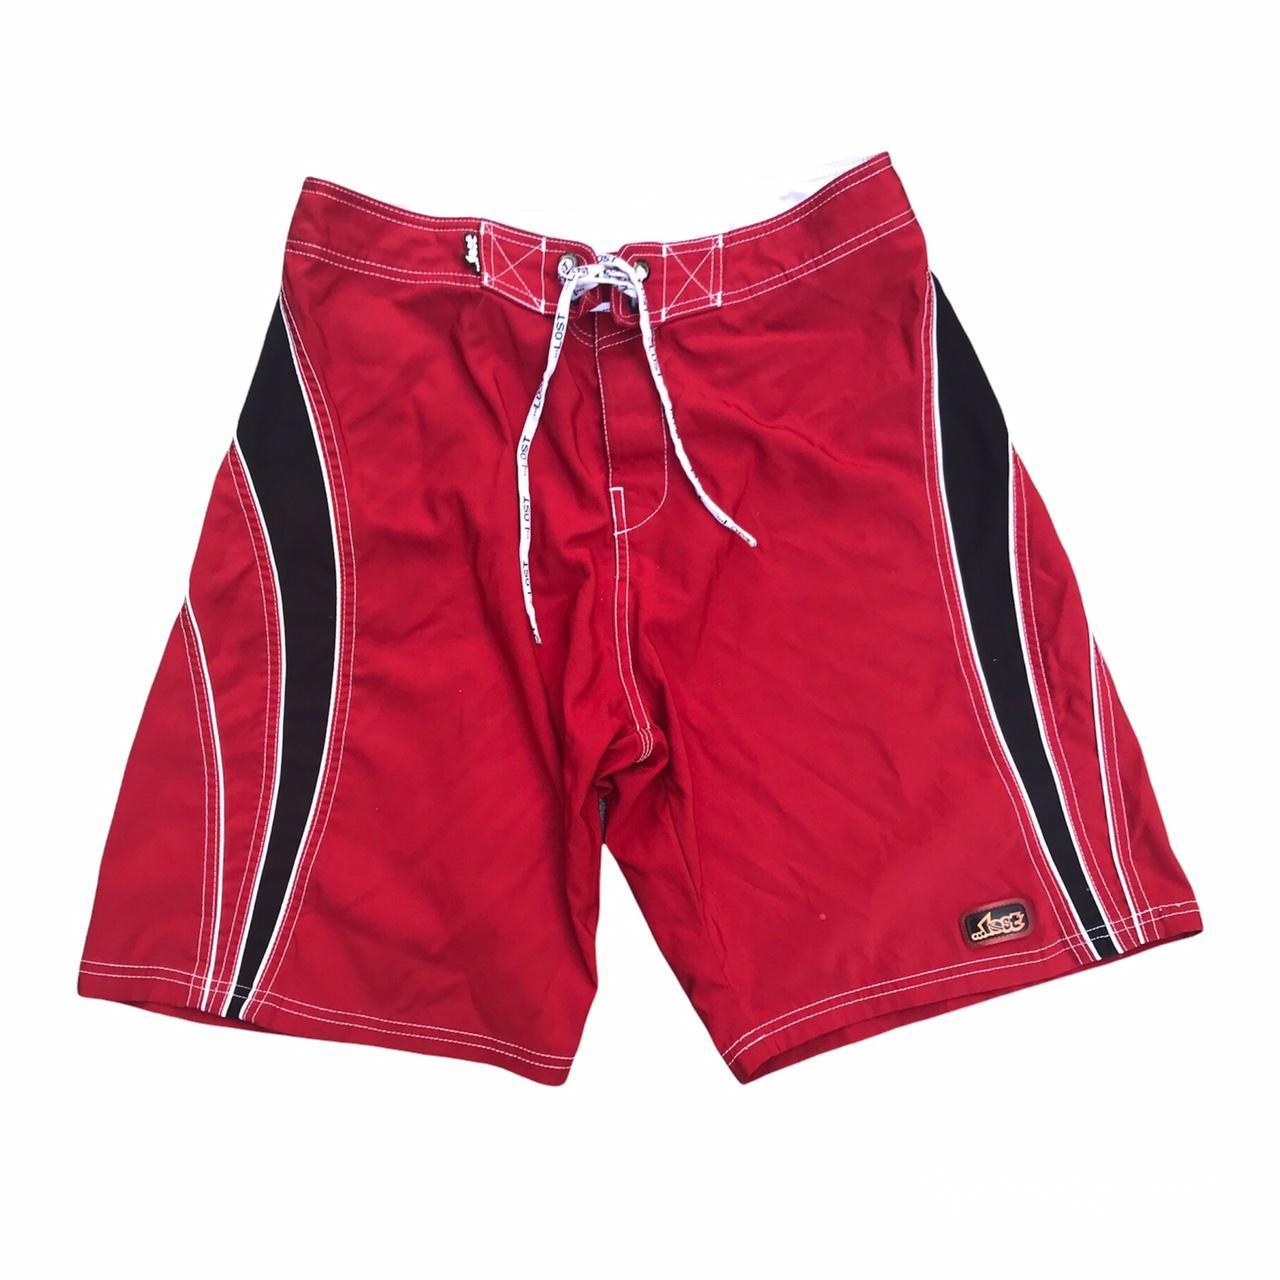 Product Image 1 - Lost shorts no pun intended